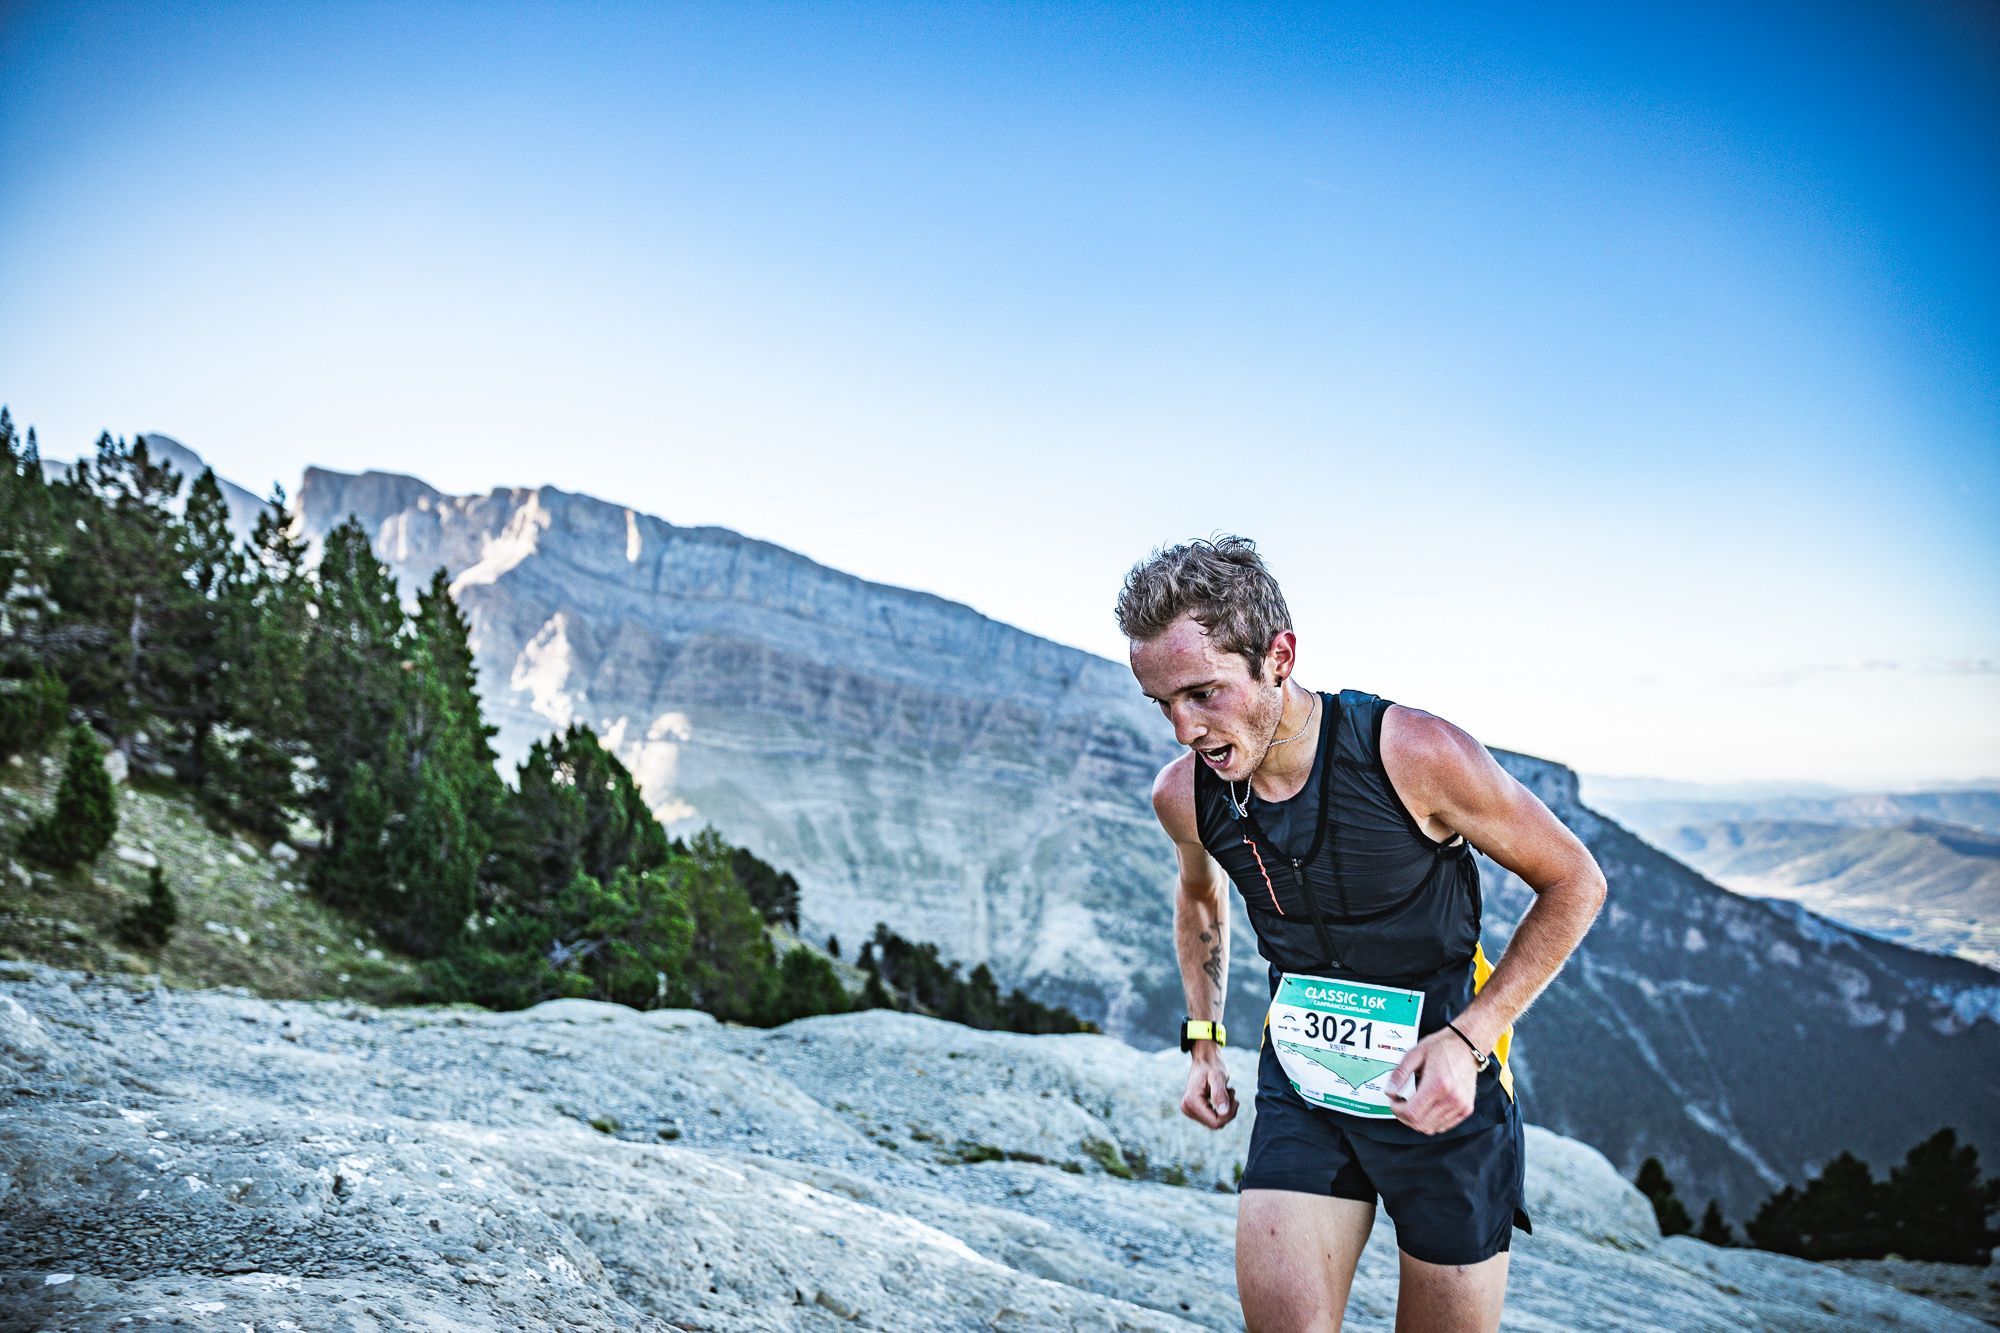 Robert Loic at the Canfranc Classic 16k